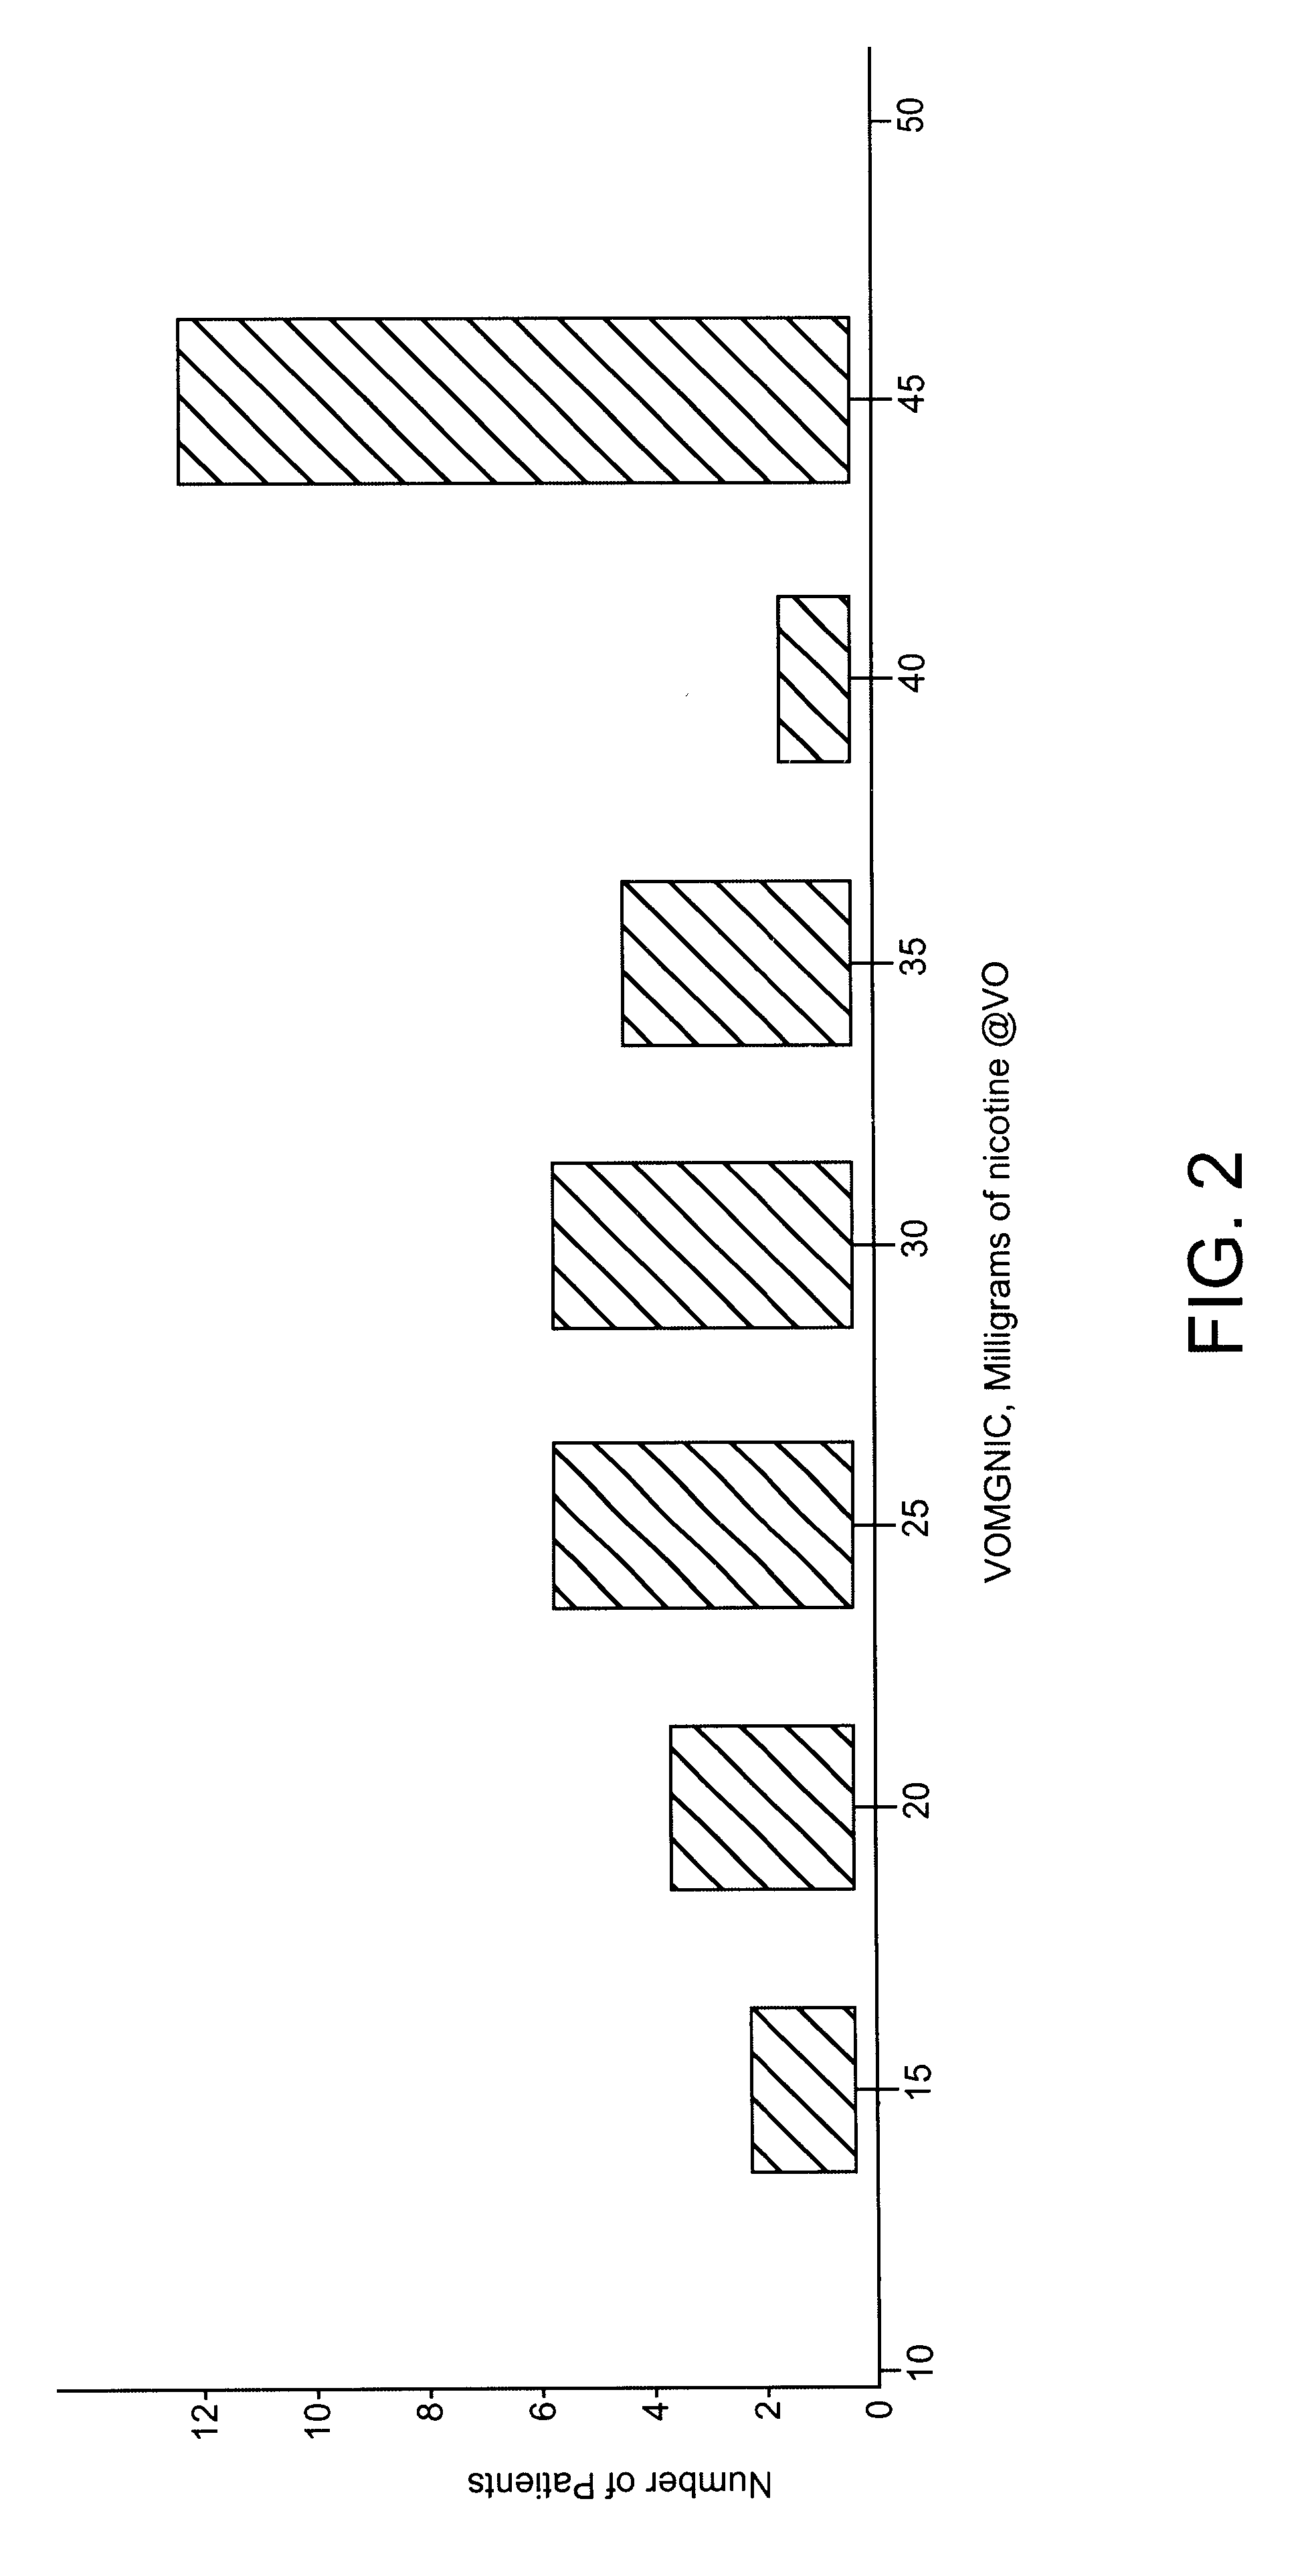 Methods for nicotine replacement dosage determination